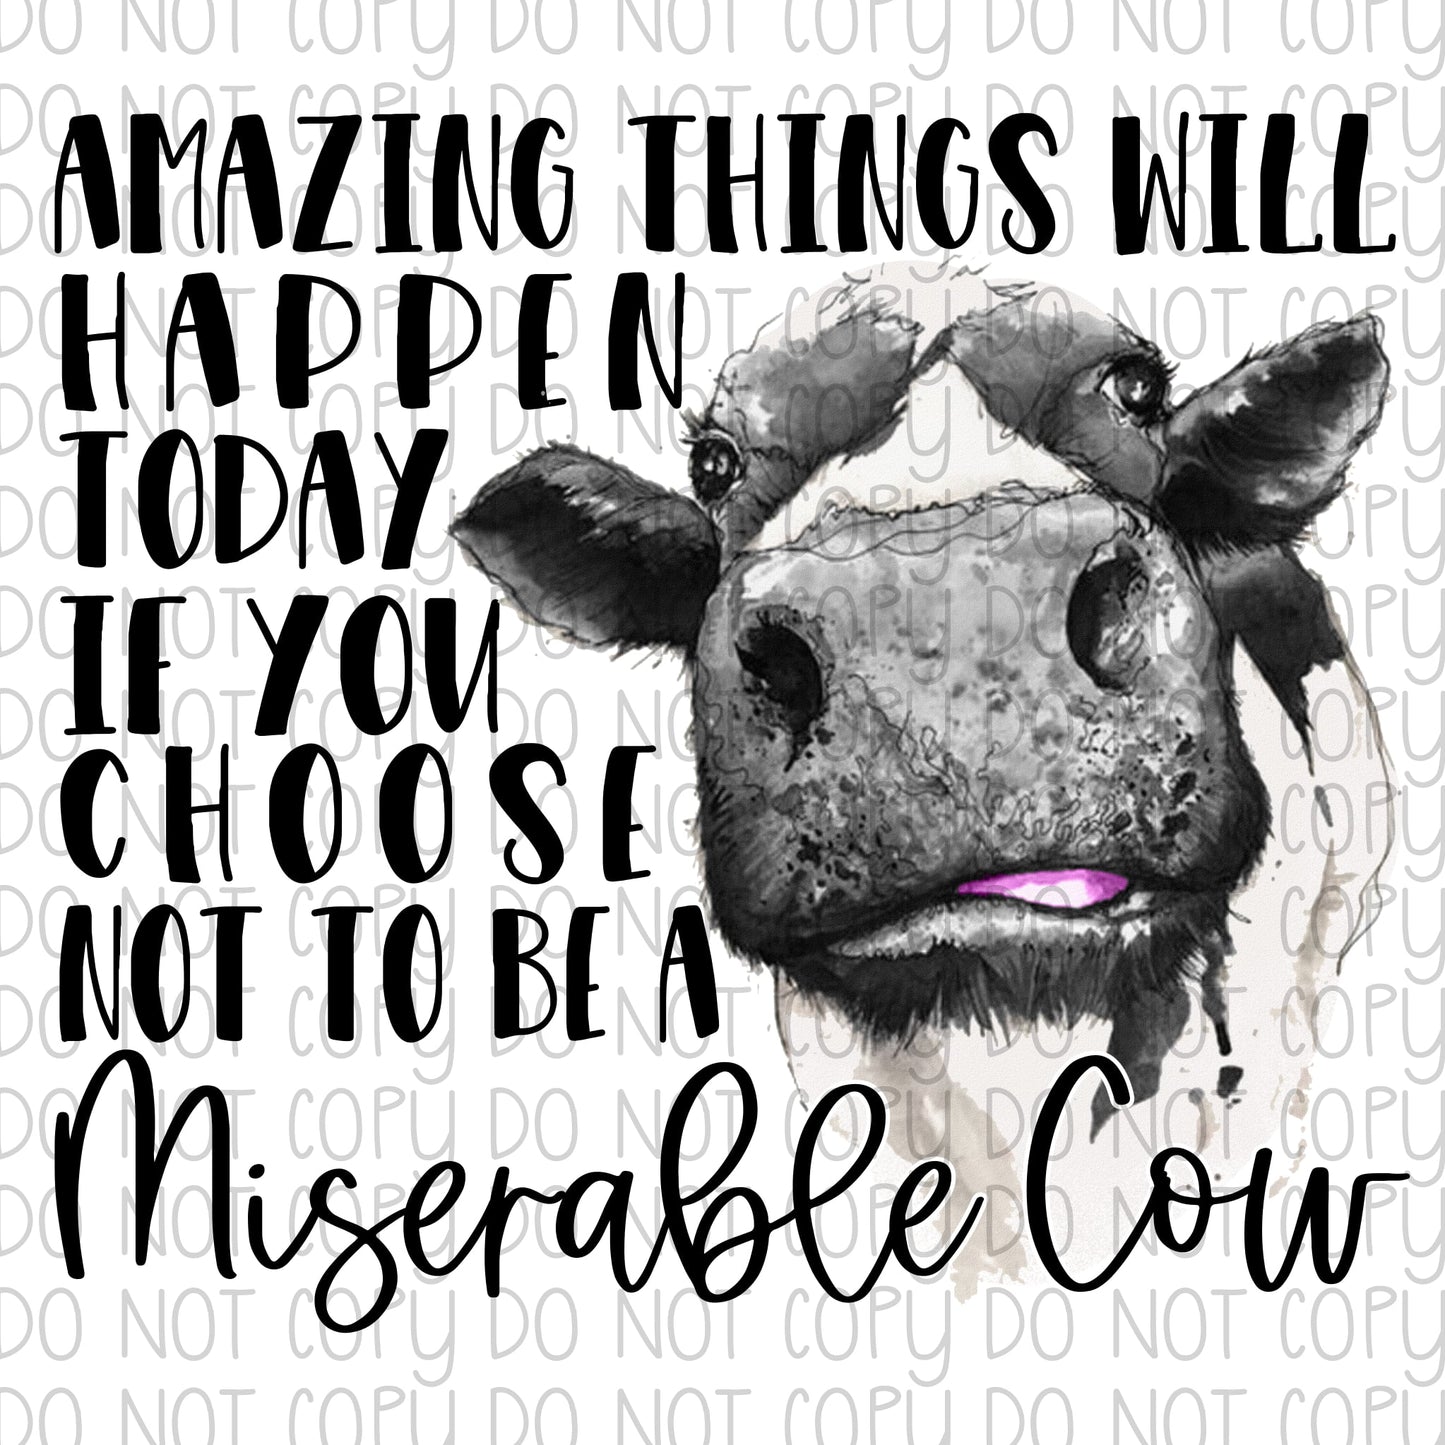 Amazing Things will happen today if you choose NOT to be a Miserable Cow DTF Transfer Design